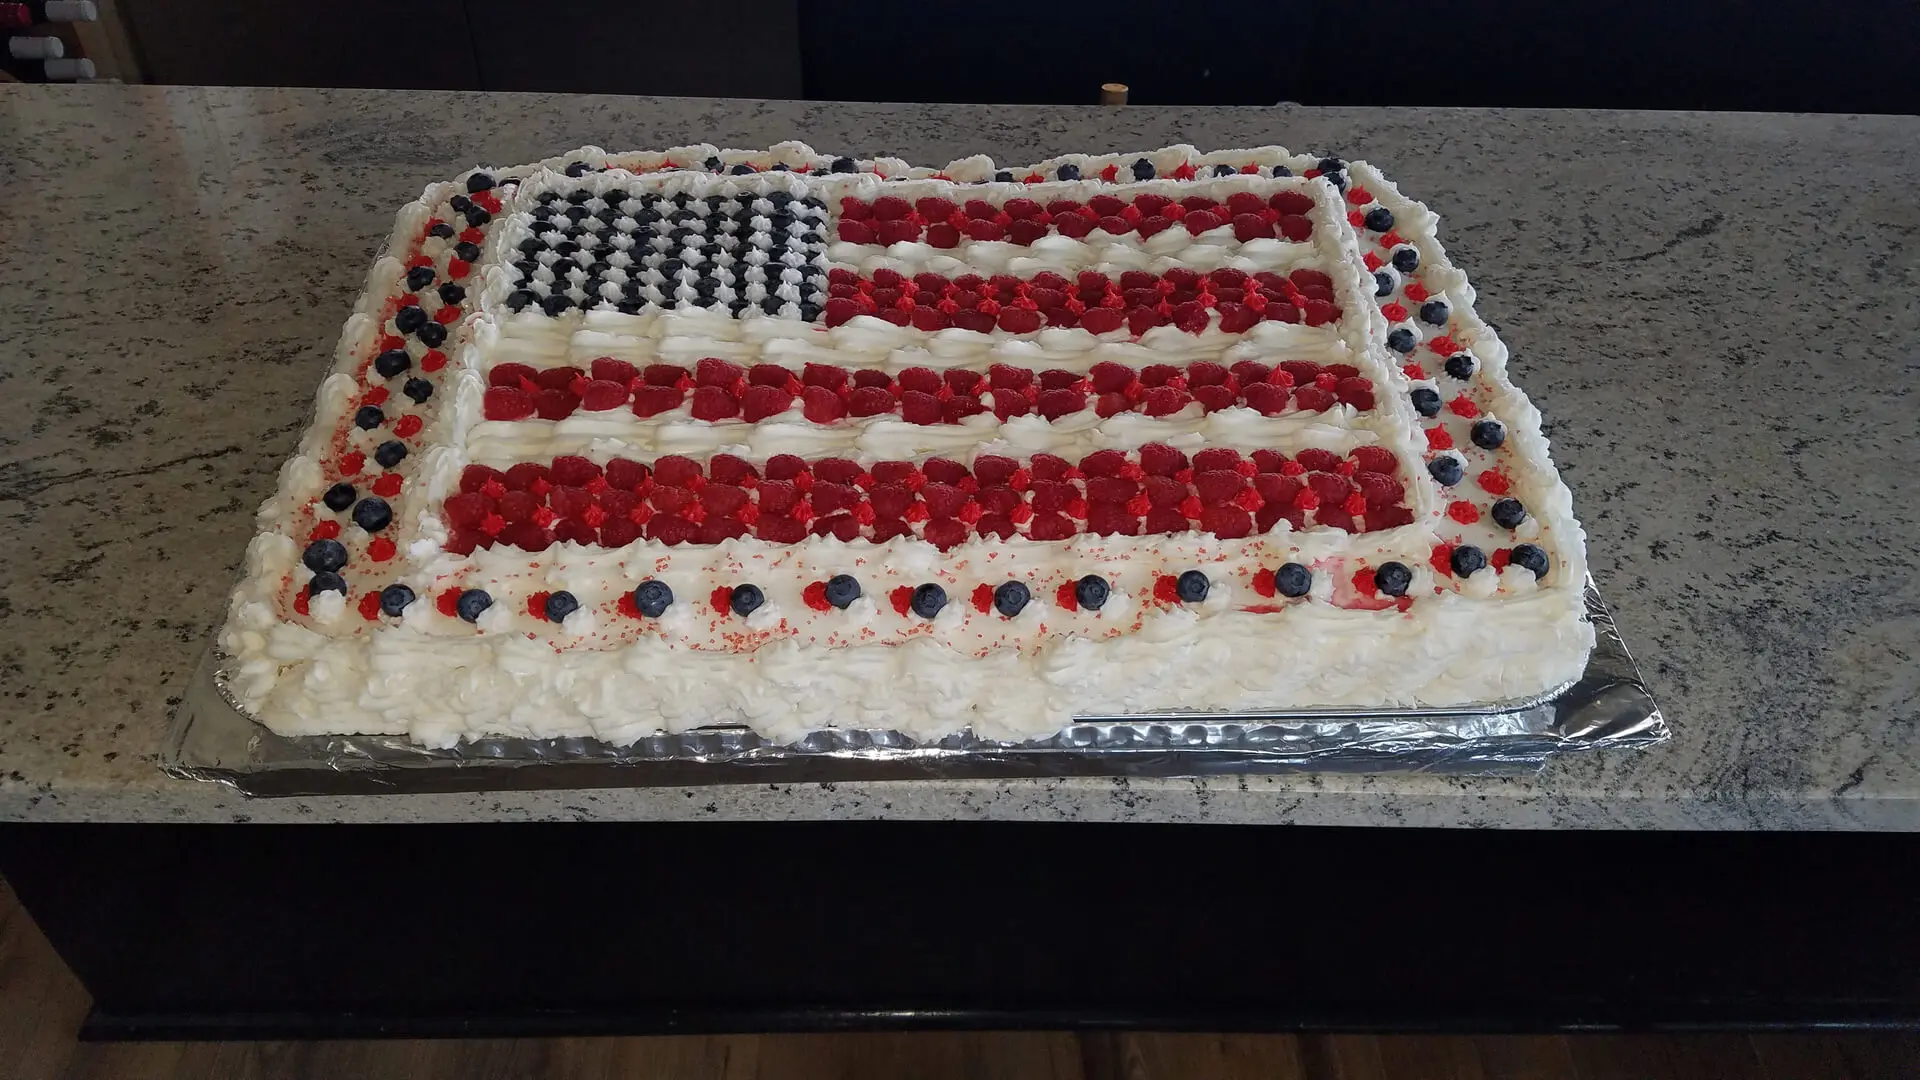 A cake with red, white and blue frosting on it.